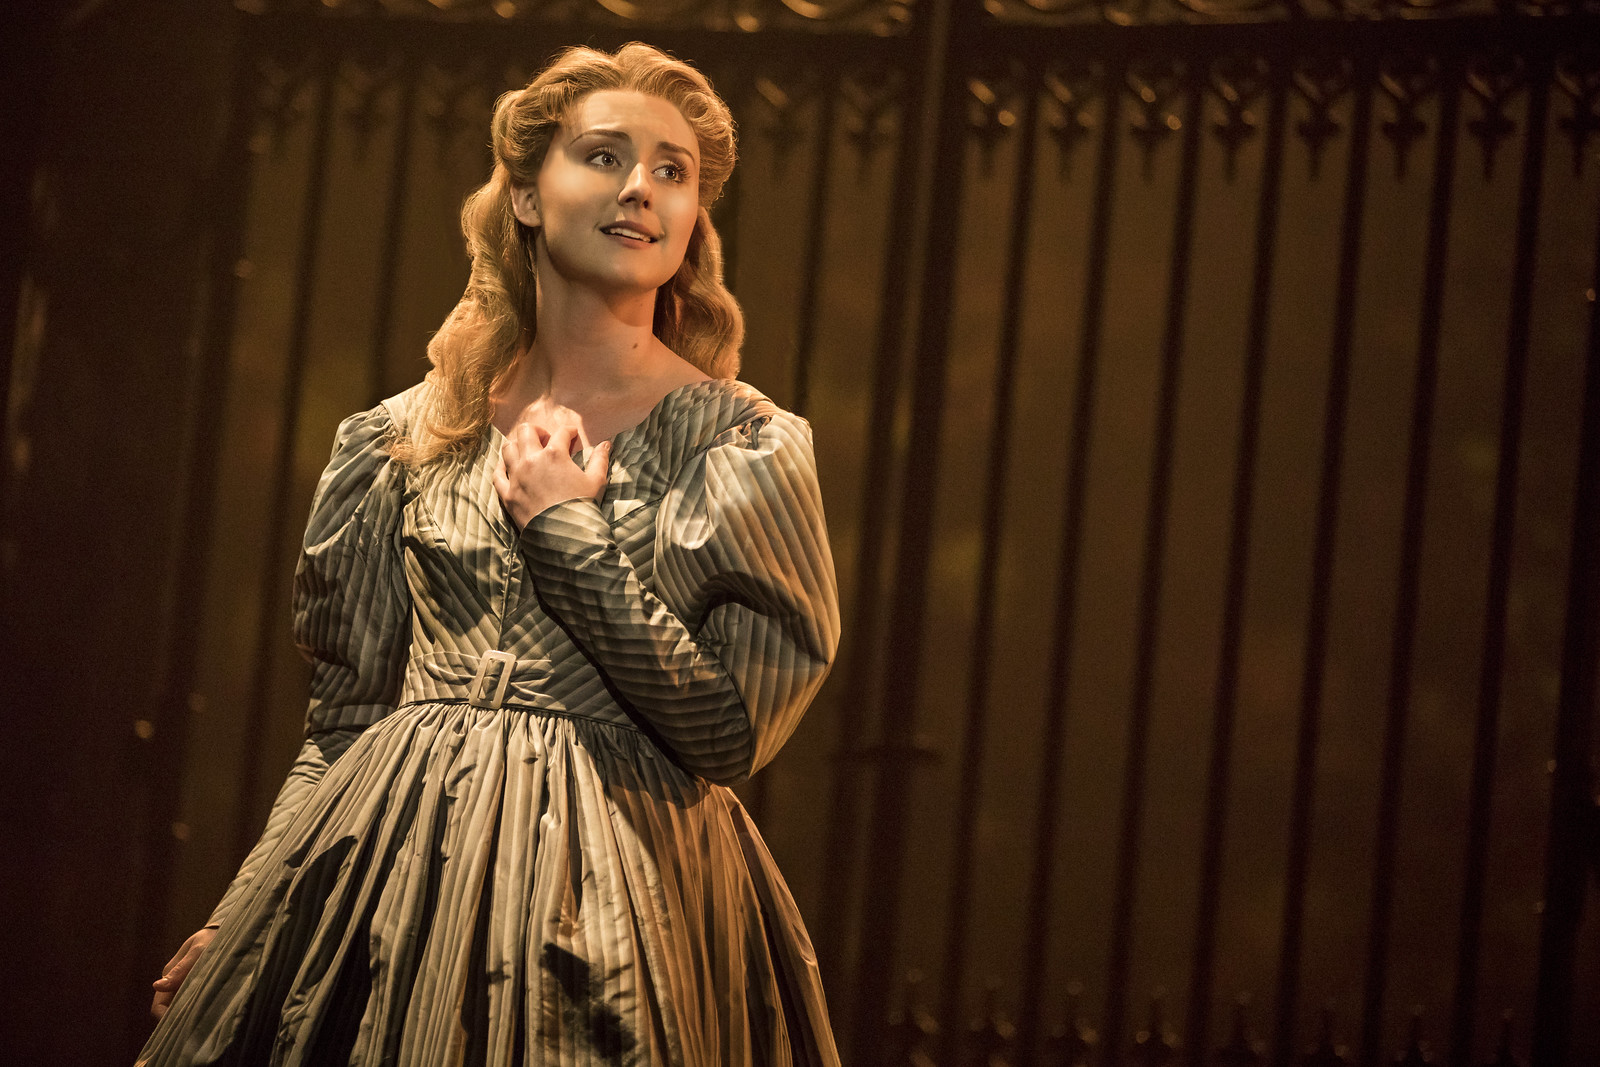 Jillian Butler as Cosette in the new national tour of Les Miserables (photo: Matthew Murphy) // Broadway in Detroit: Les Miserables At The Fisher Theatre - Wading in Big Shoes